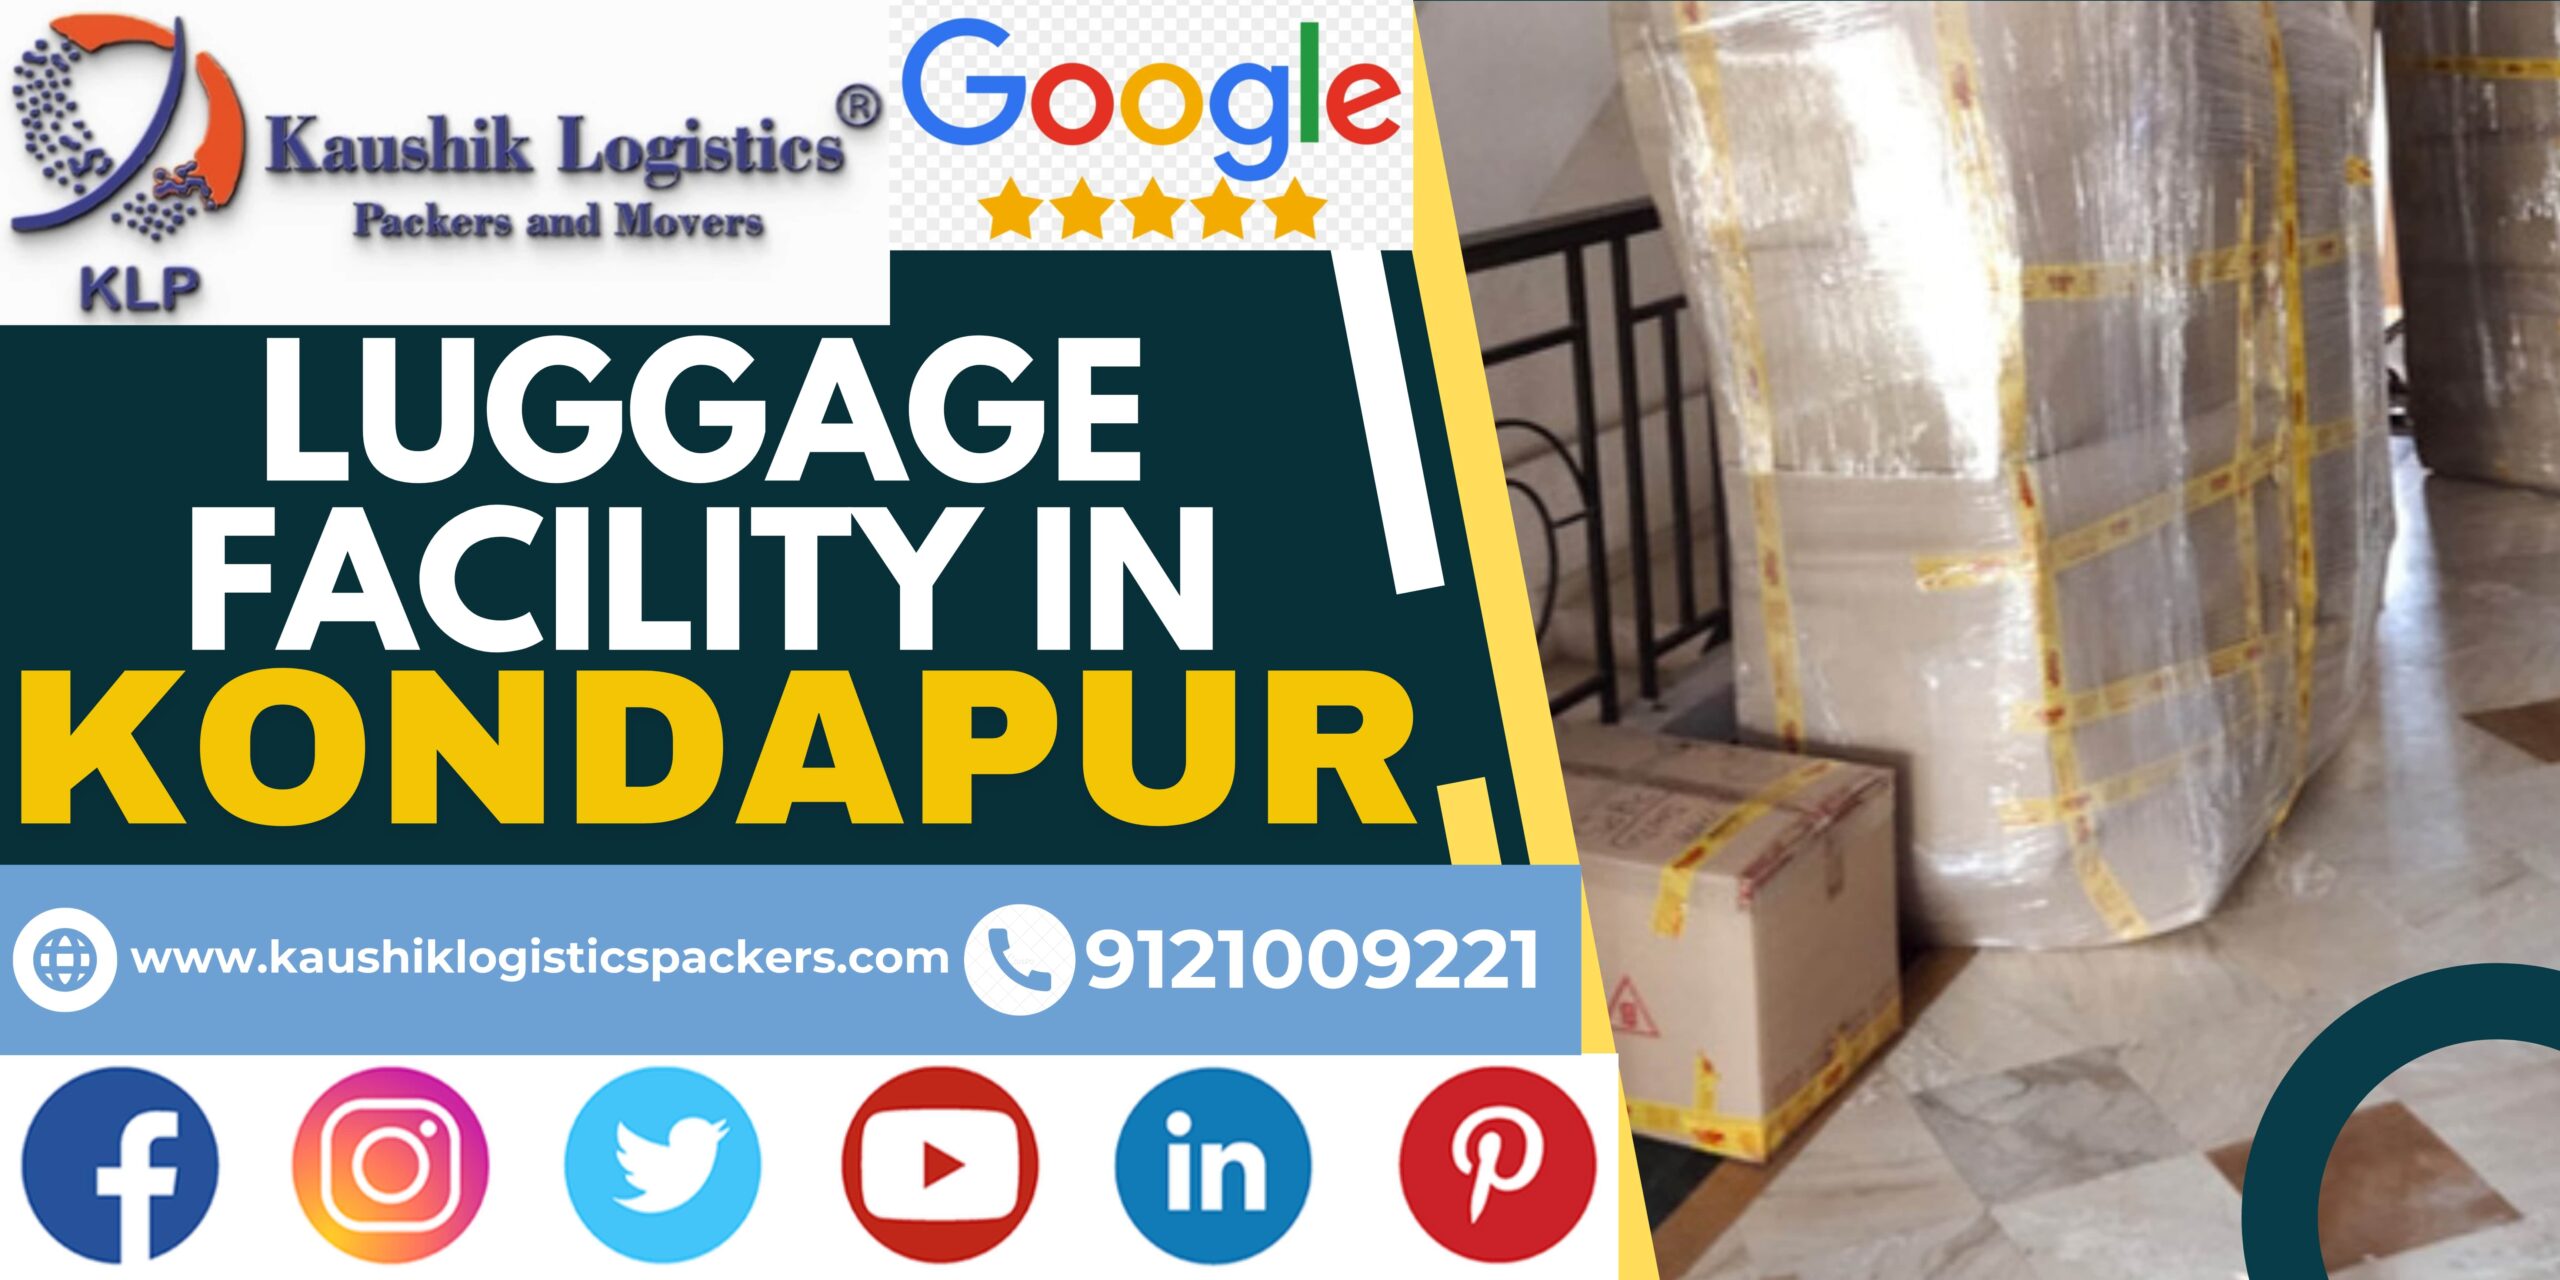 Packers and Movers In Kondapur